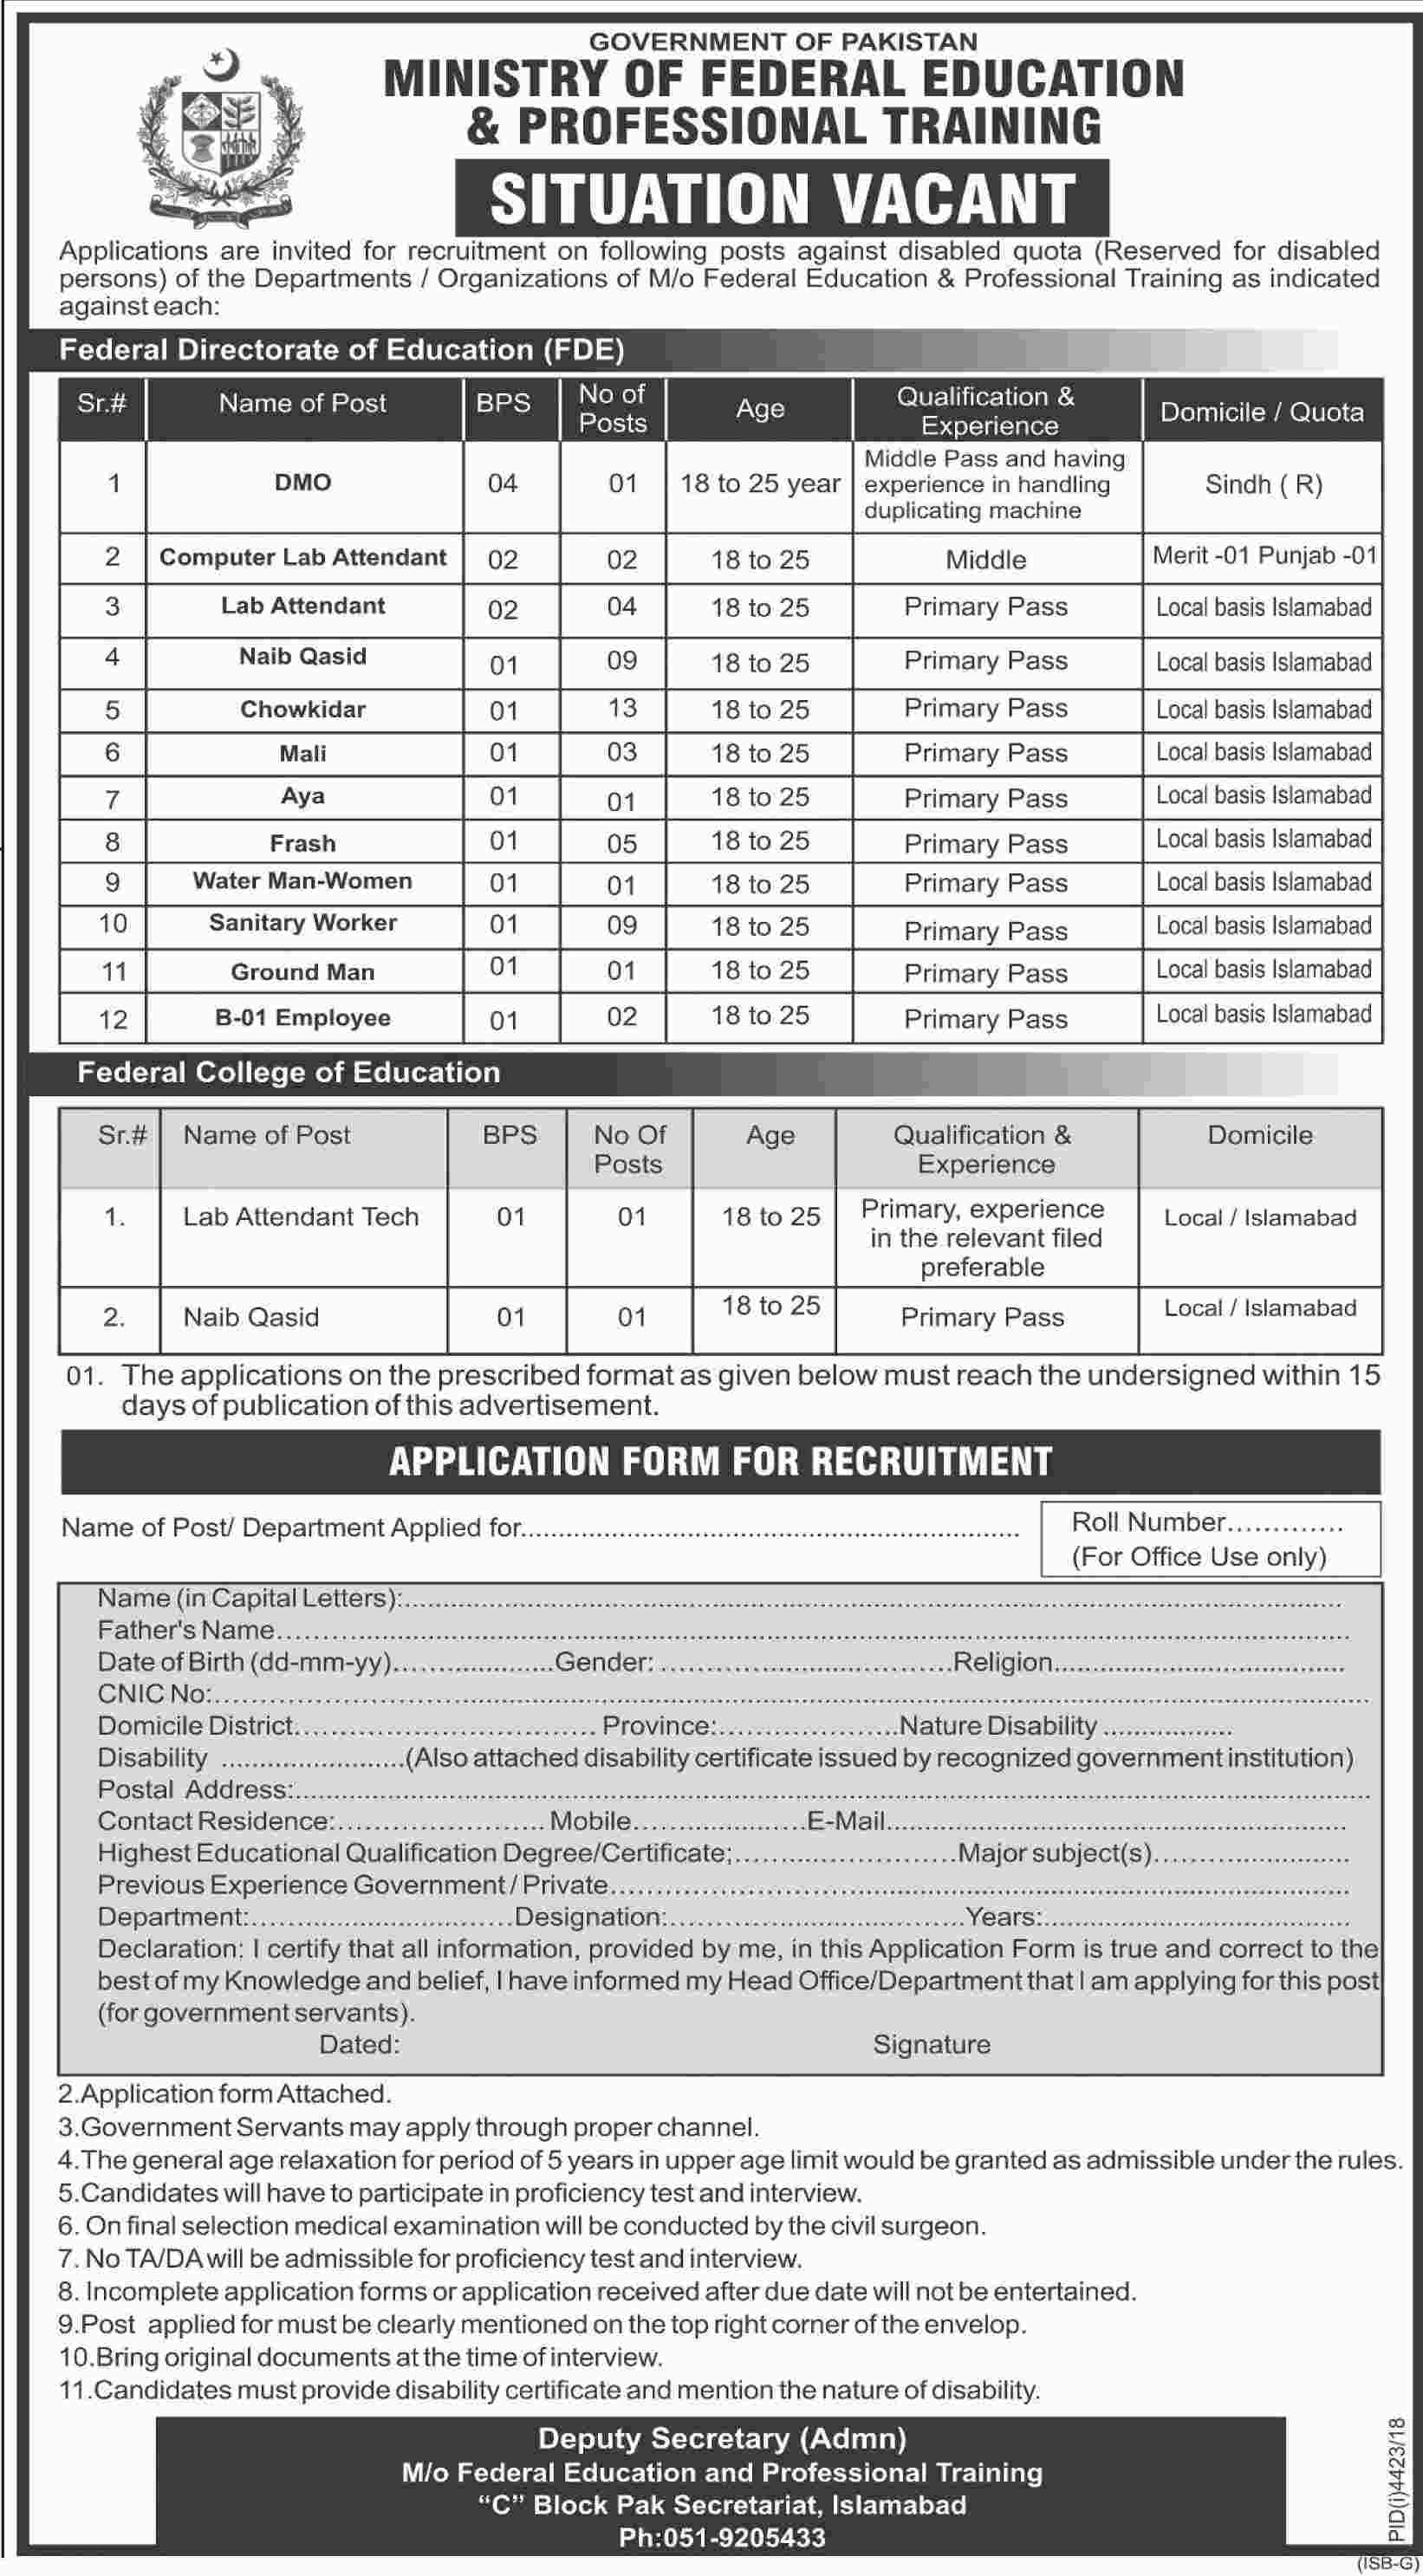 Ministry of Federal Education and Professional Training jobs 2019